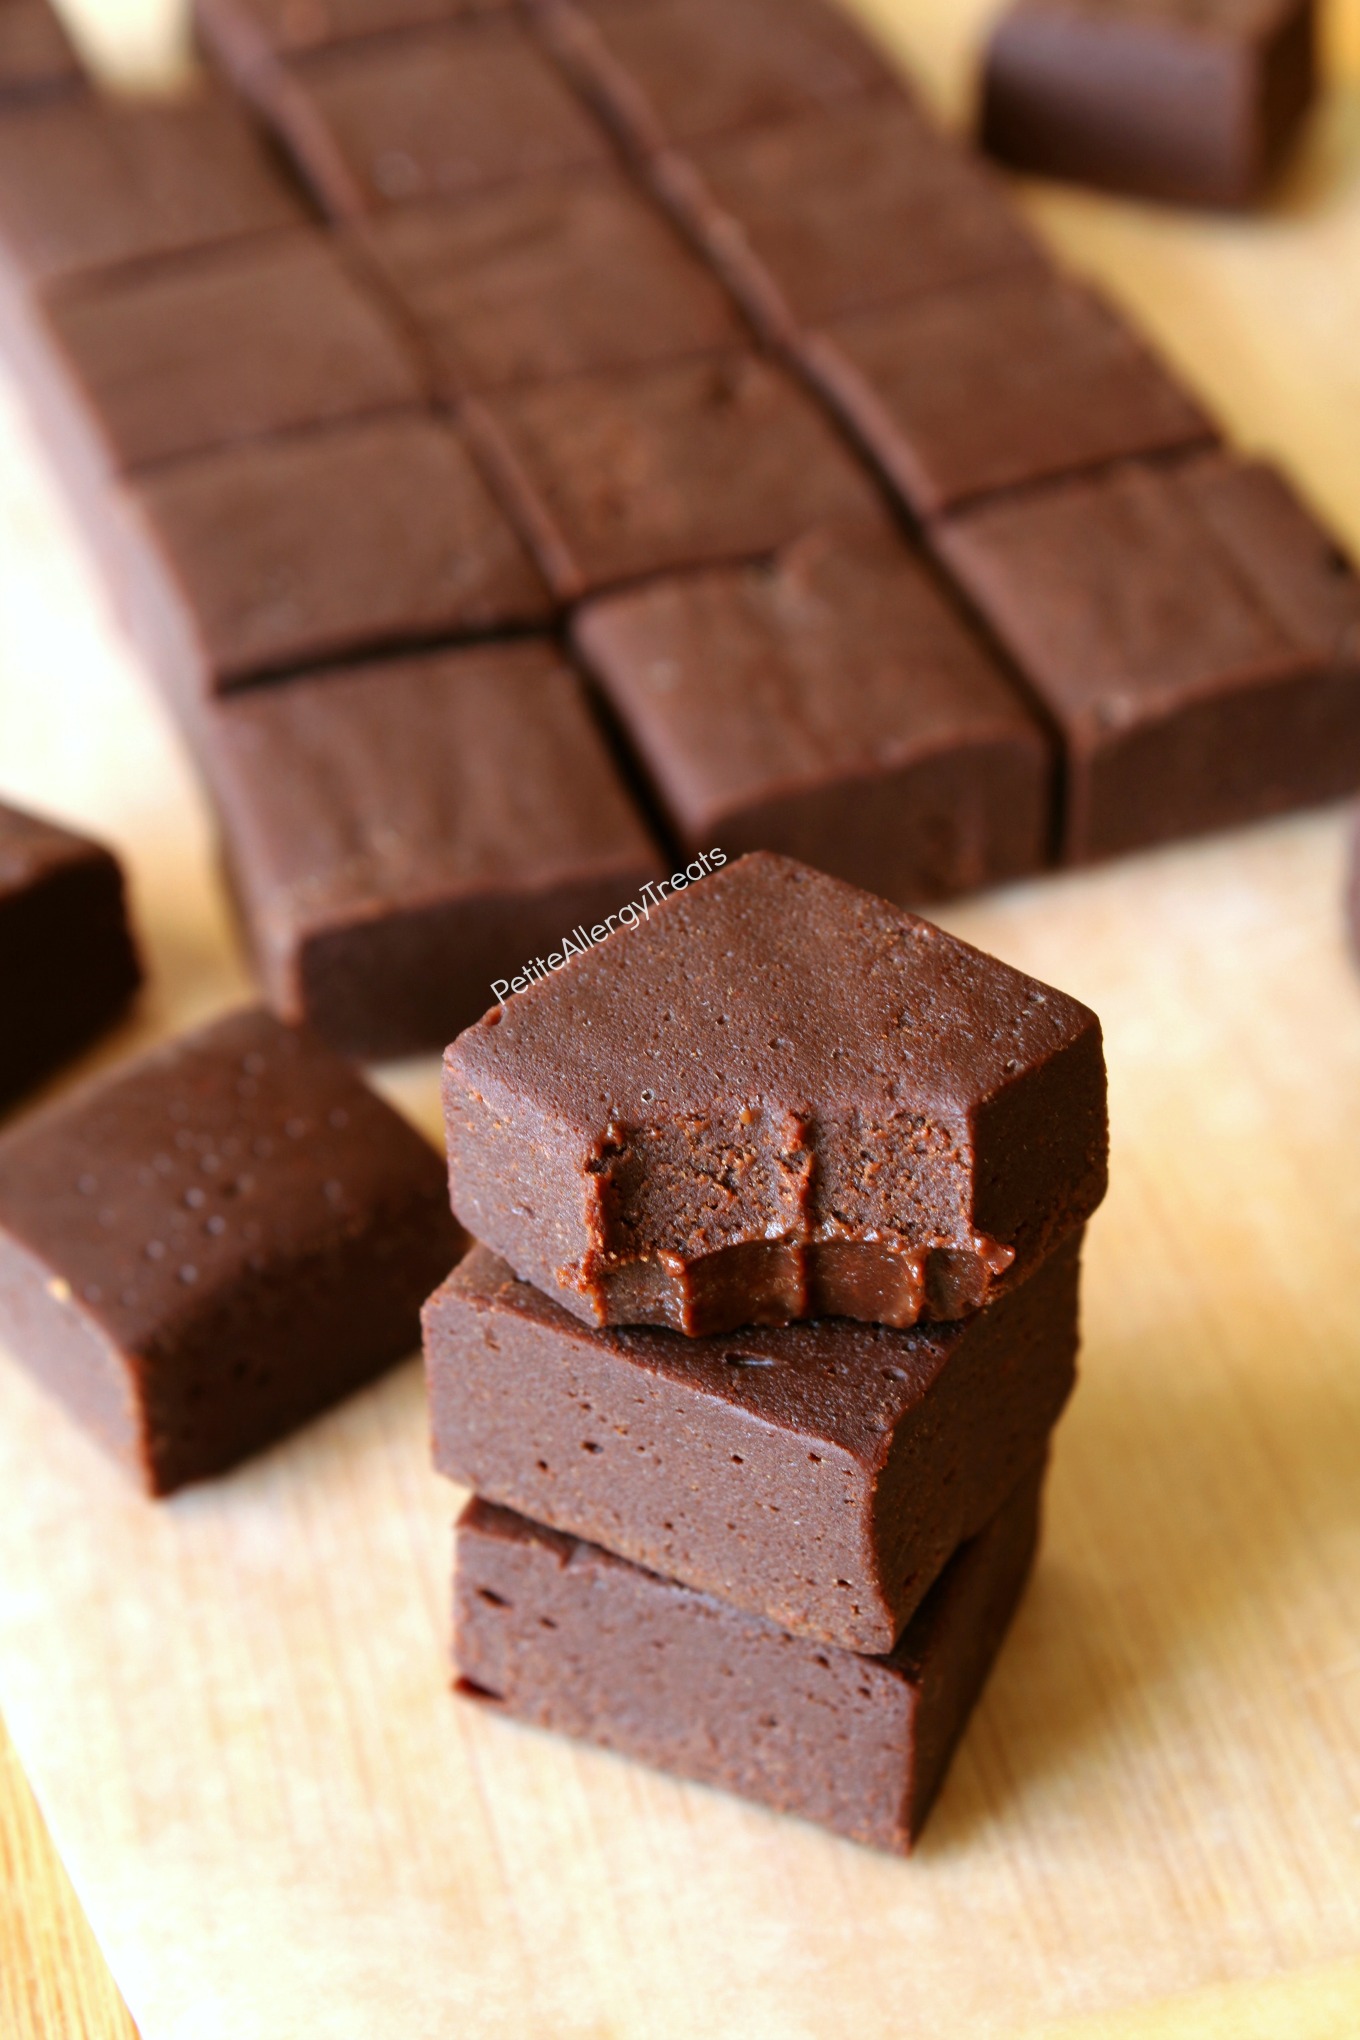 Easy Dairy Free Fudge Recipe (vegan gluten free)- Healthy chocolate fudge (with vegetables) for Christmas! Dye free gluten free and food allergy friendly